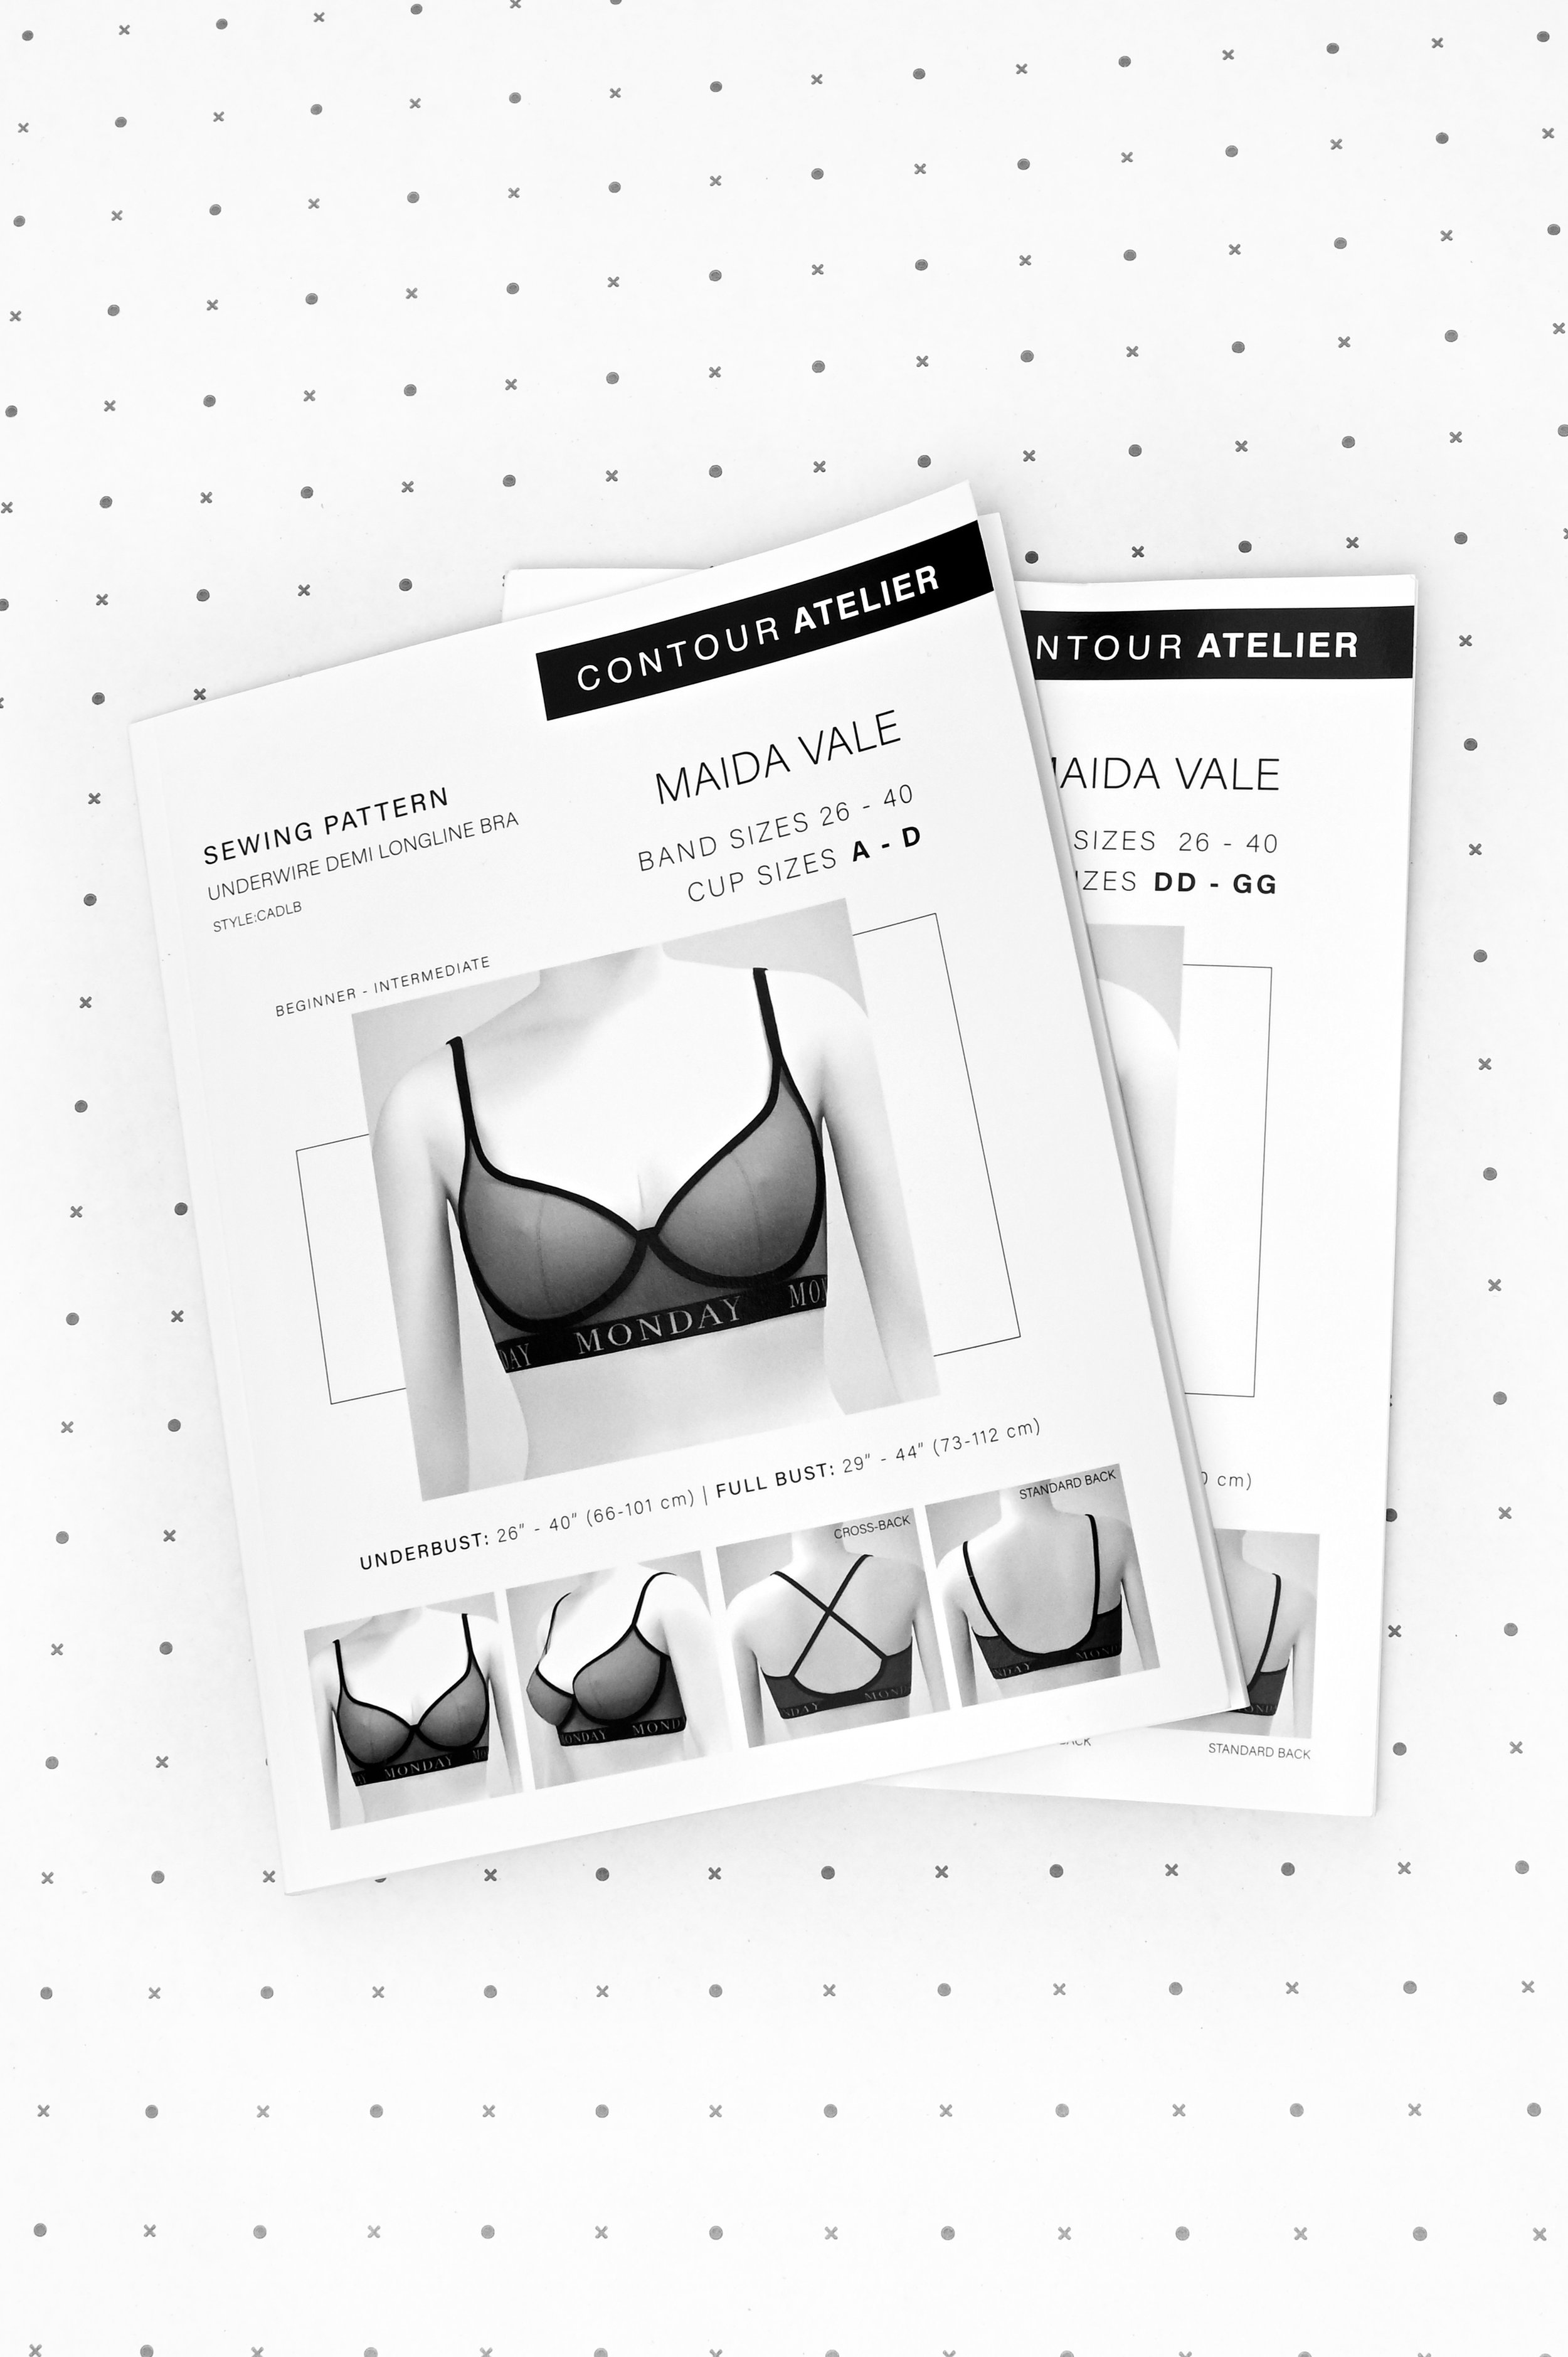 AllChestsWelcome: Sewcialists Editors Try Bra Sewing! – Sewcialists